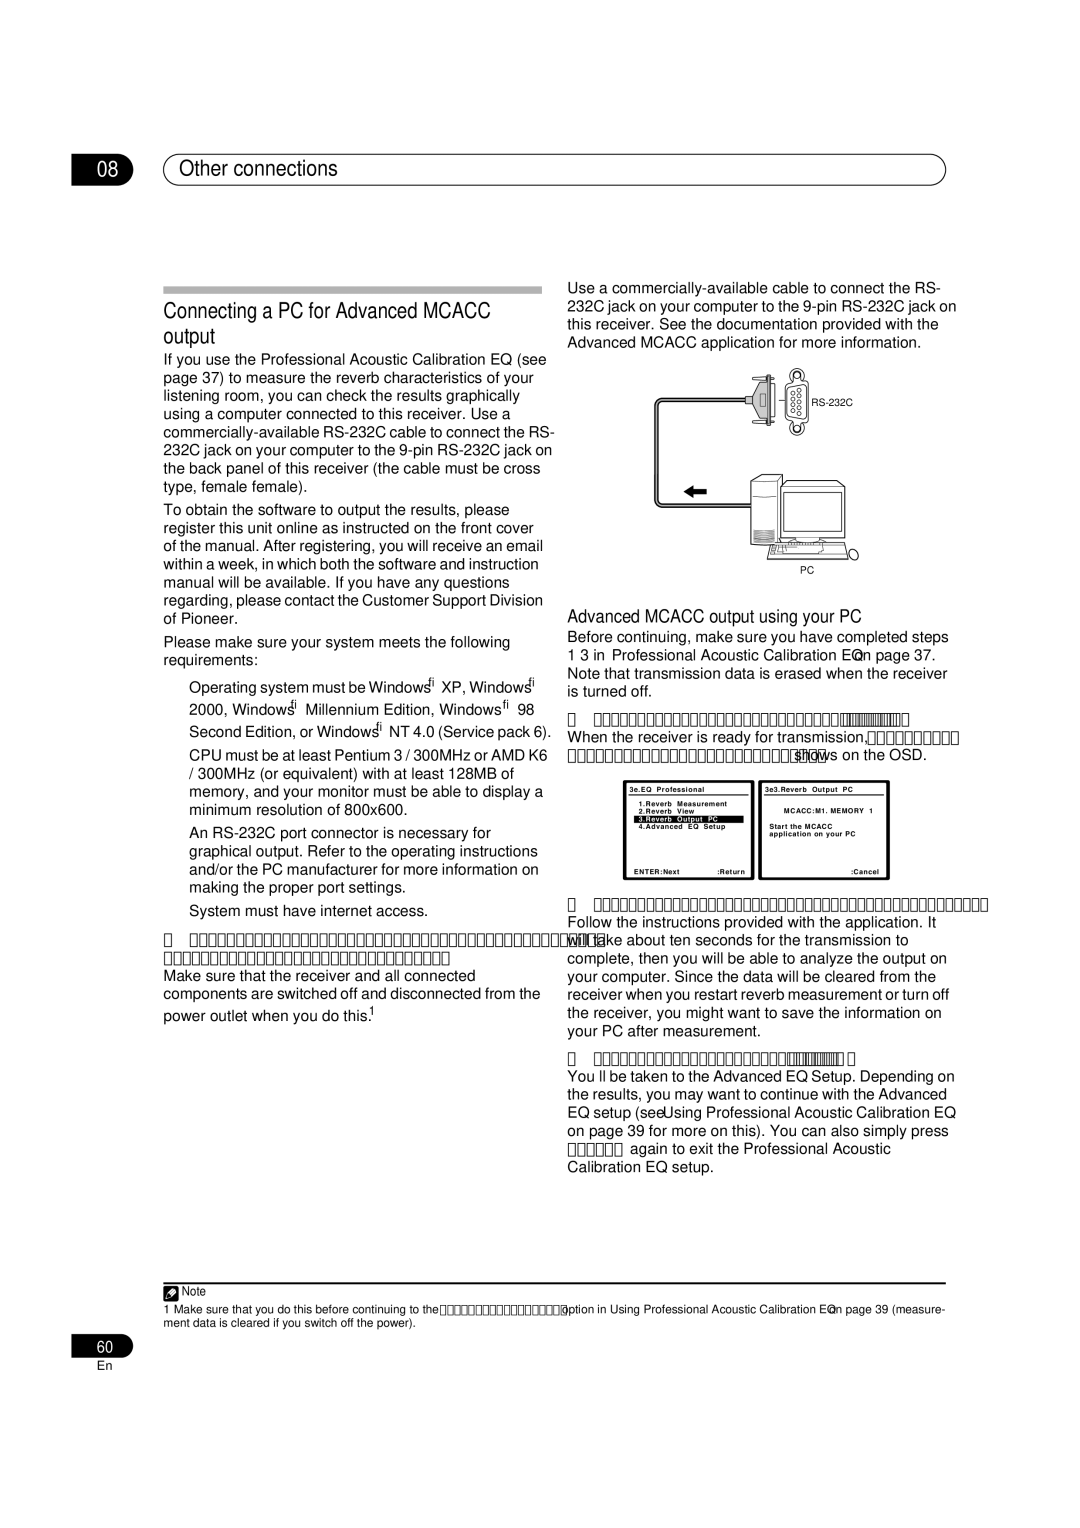 Pioneer VSX-74TXVI manual Other connections Connecting a PC for Advanced Mcacc output, Advanced Mcacc output using your PC 